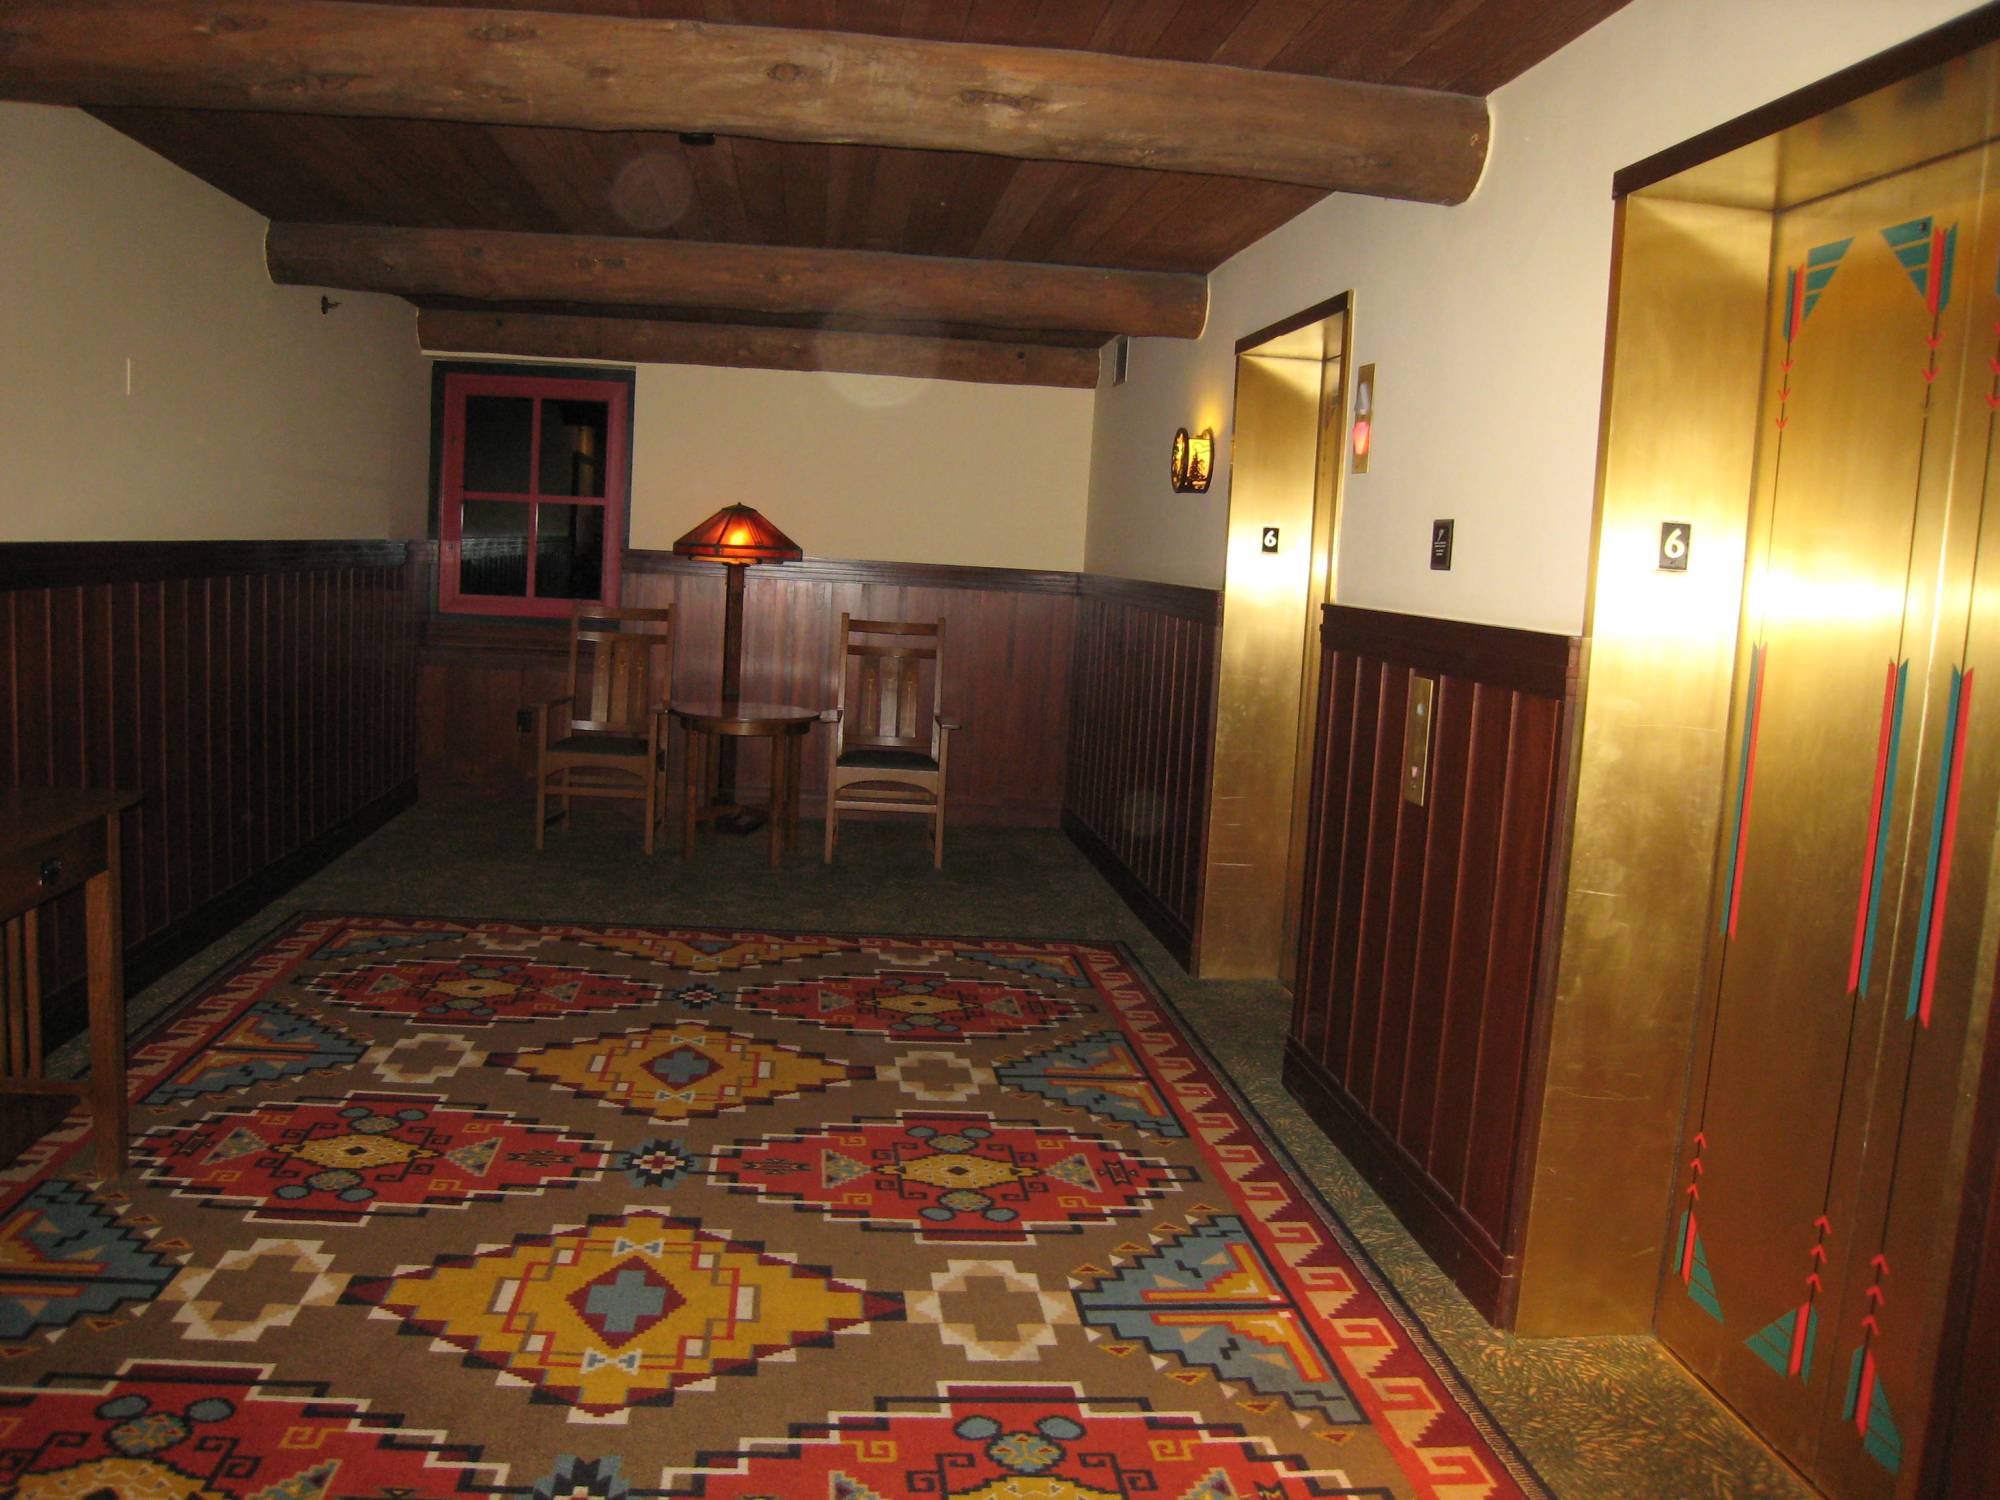 Wilderness Lodge - Guest Areas